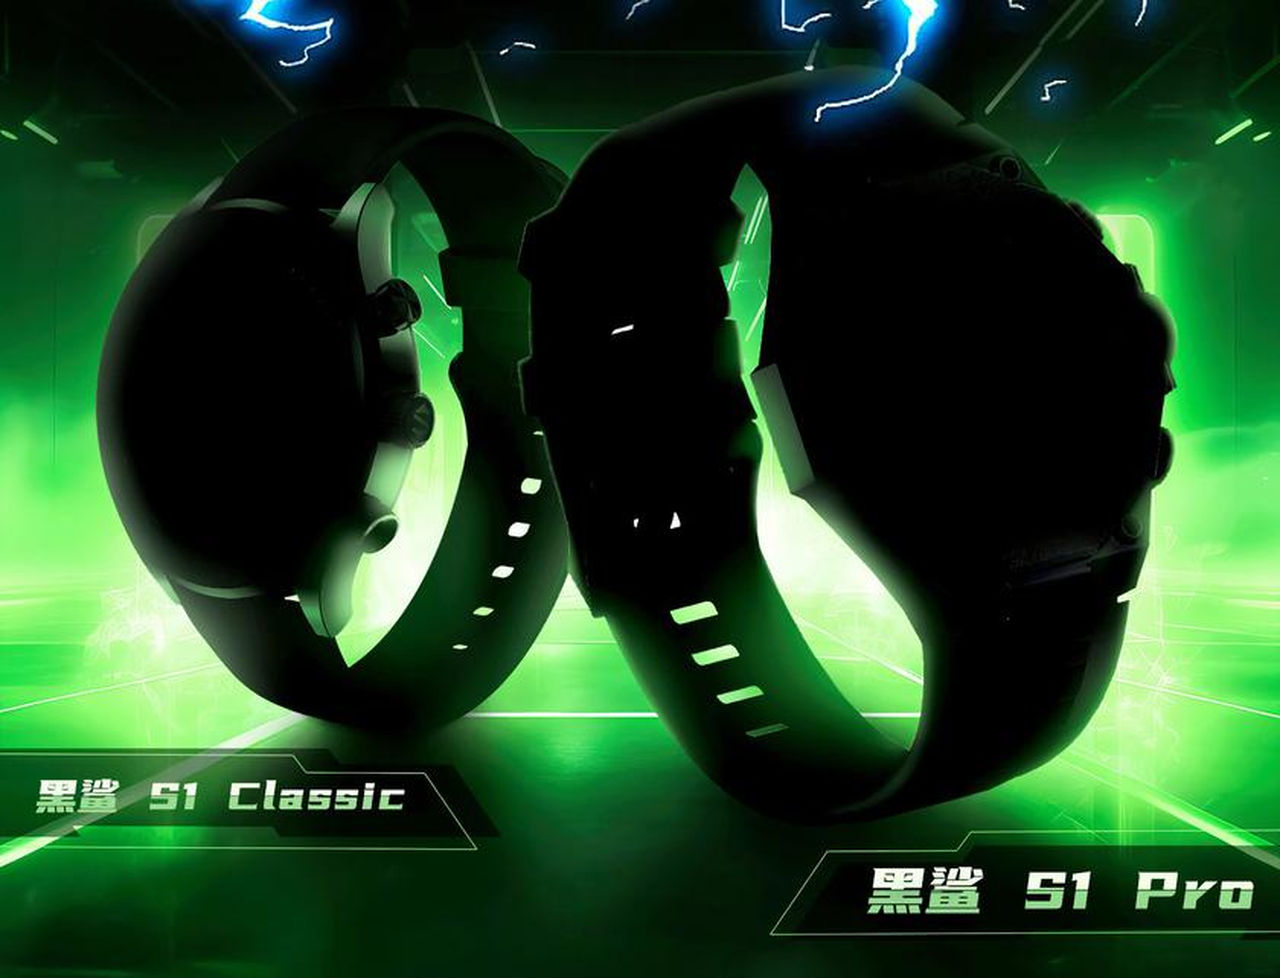 Xiaomi Black Shark S1 Pro and Black Shark S1 Classic smartwatches Preview